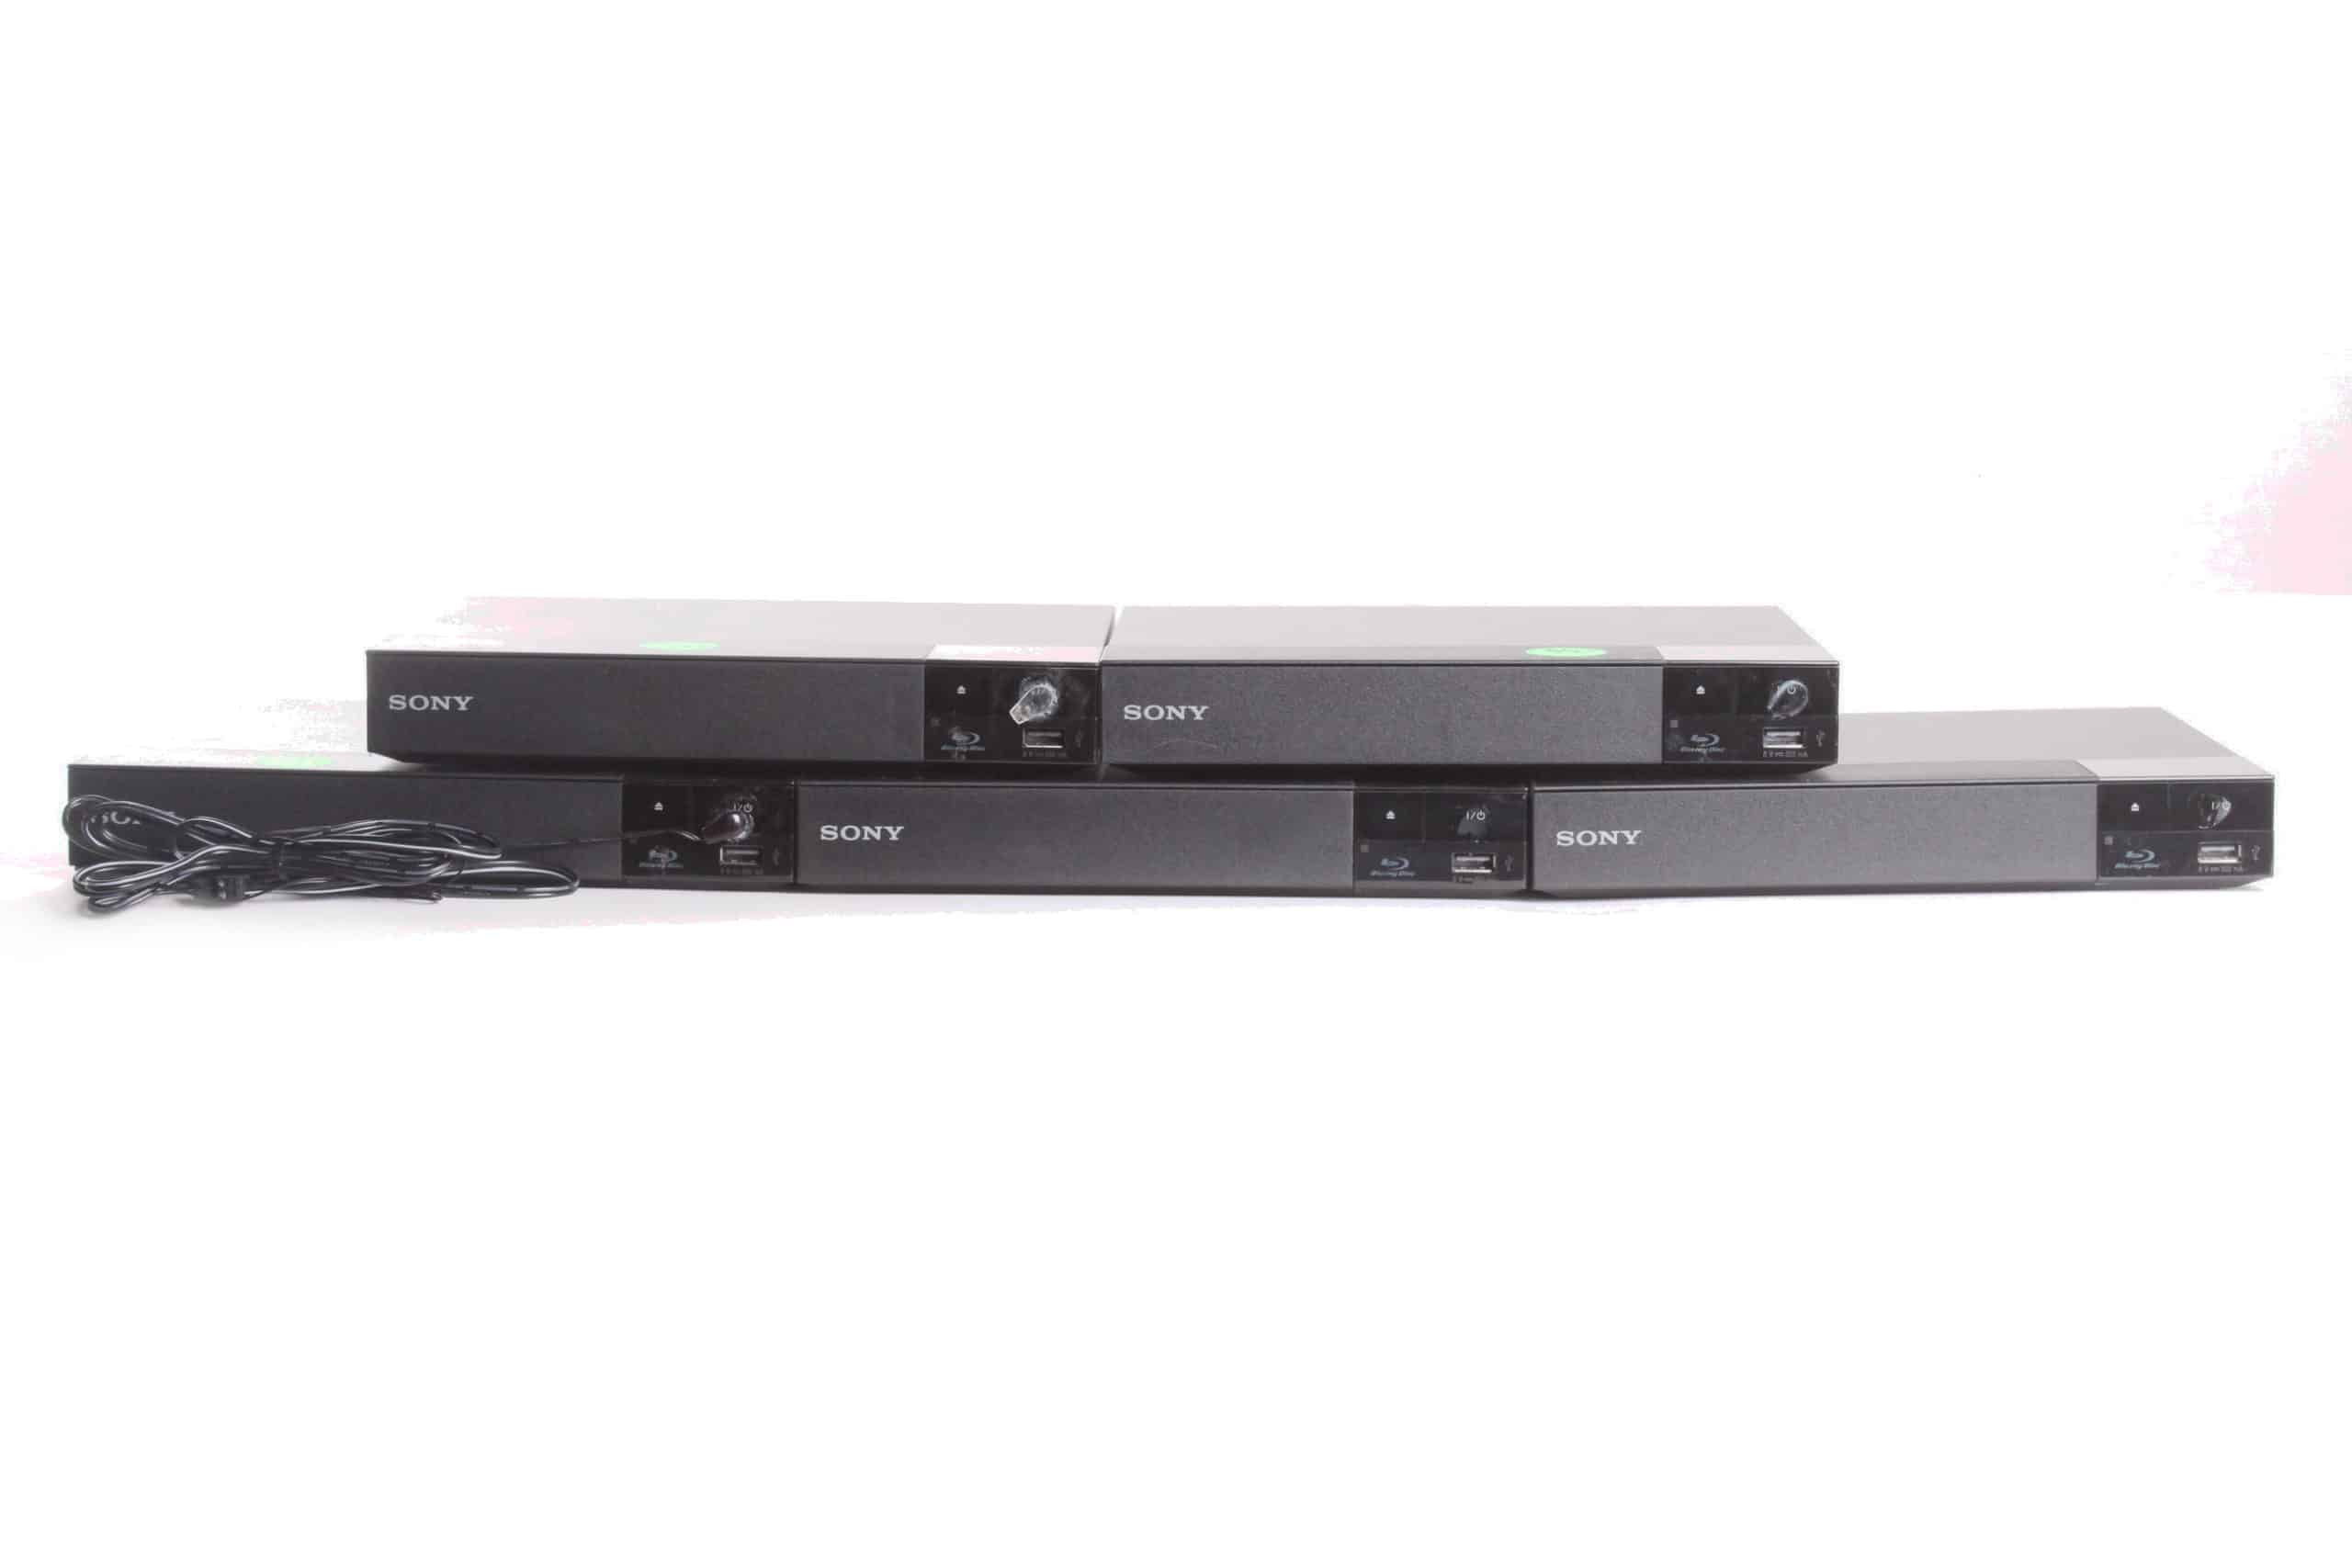 Sony BDP-S1500 Blu-Ray DVD Player (Lot of 5)